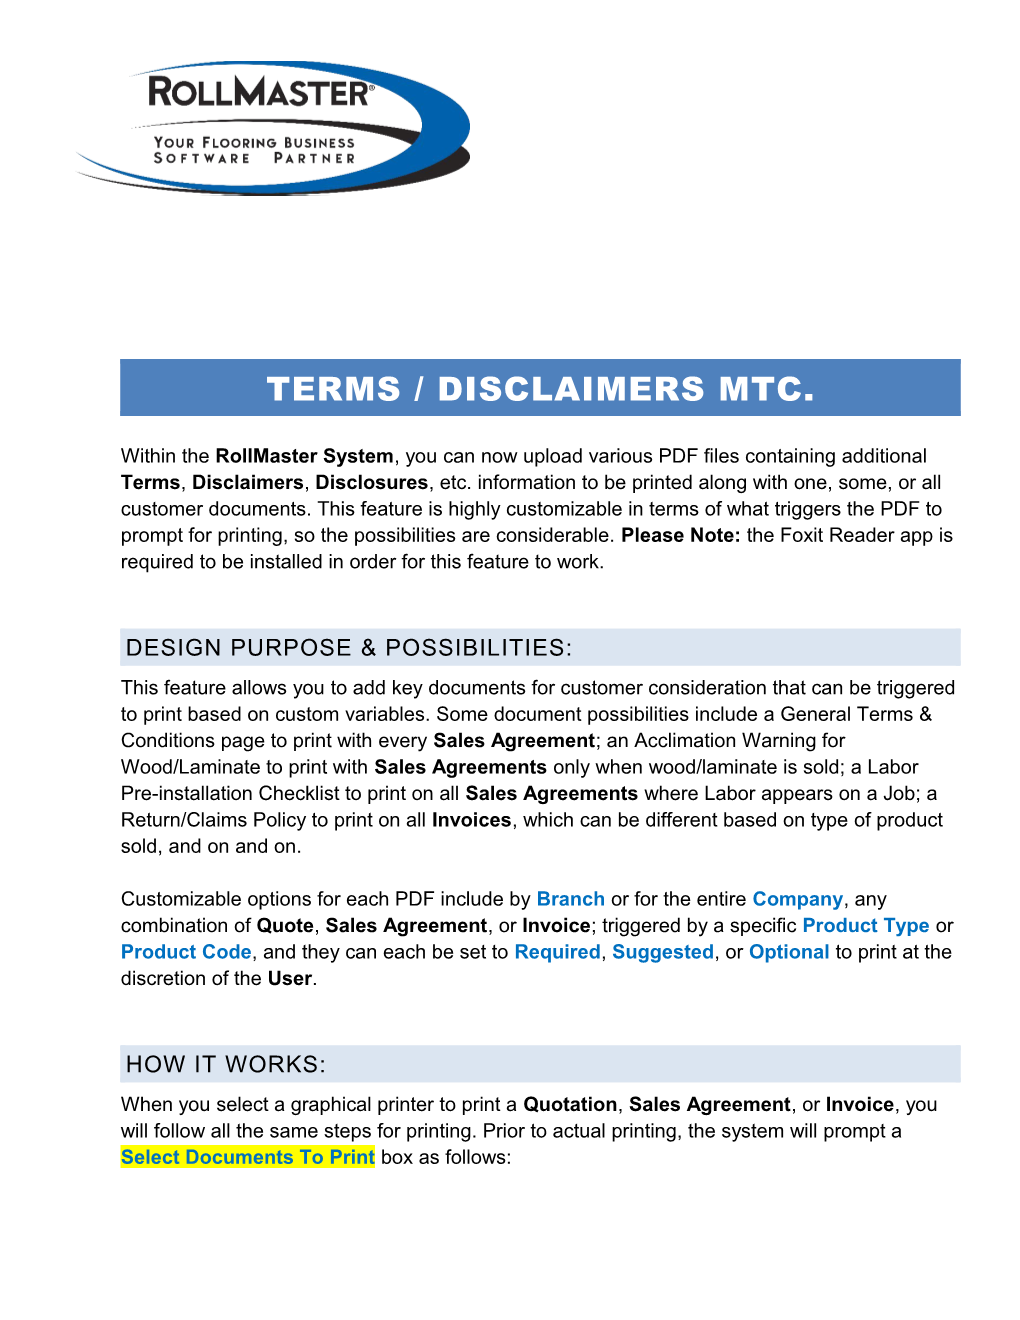 Terms/Disclaimers Mtc